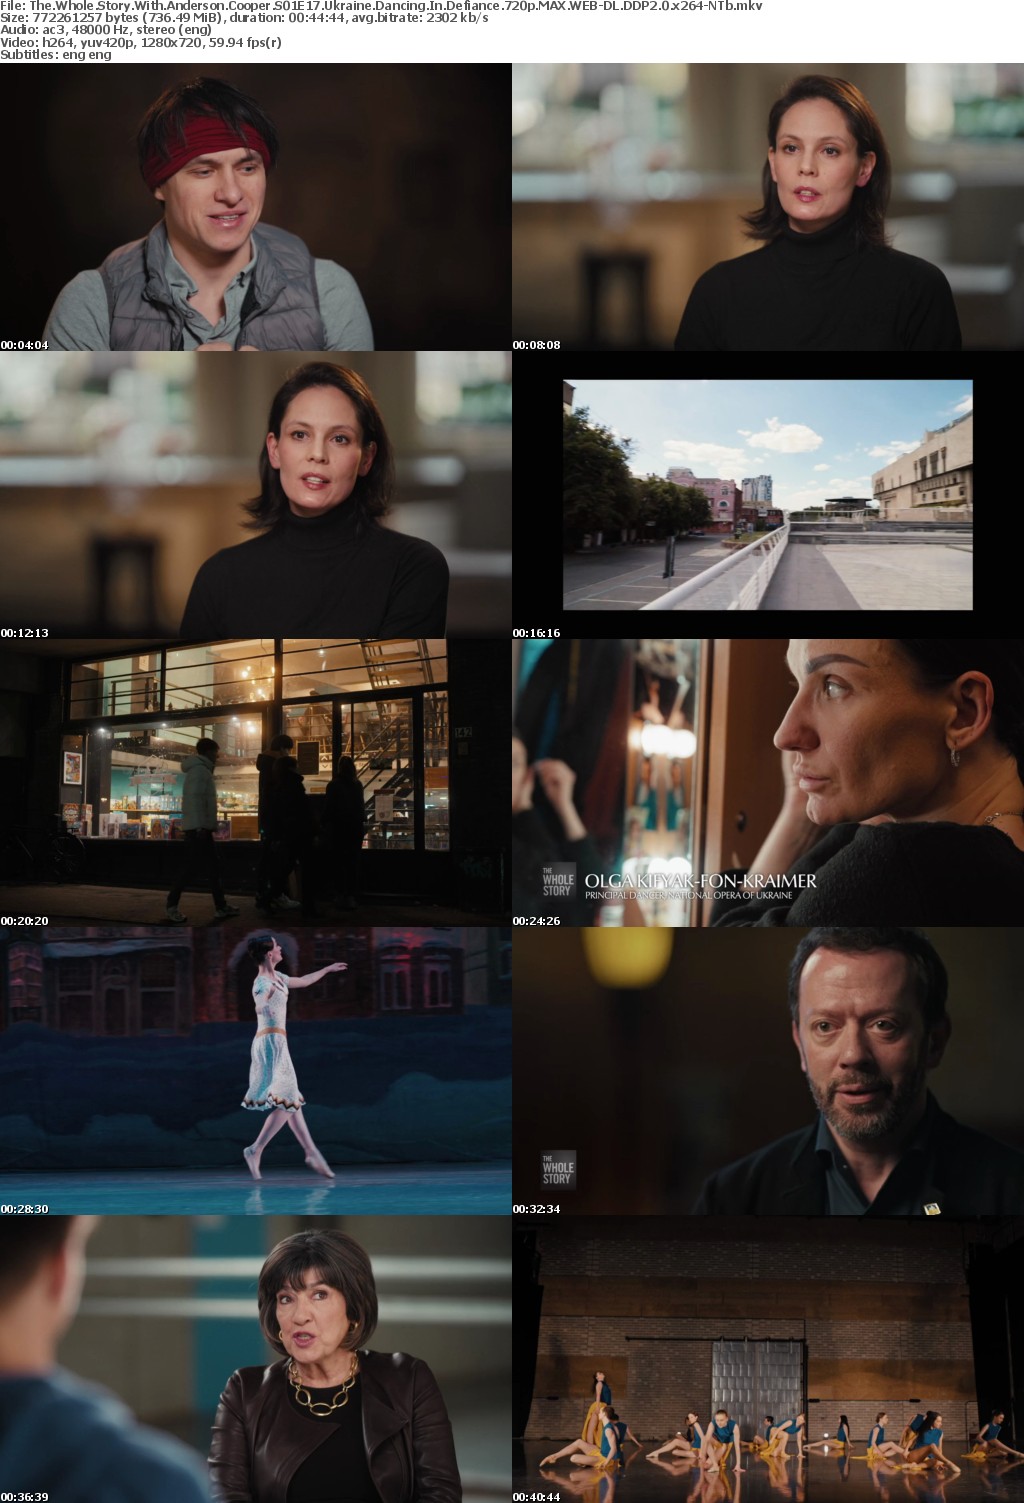 The Whole Story With Anderson Cooper S01E17 Ukraine Dancing In Defiance 720p MAX WEB-DL DDP2 0 x264-NTb